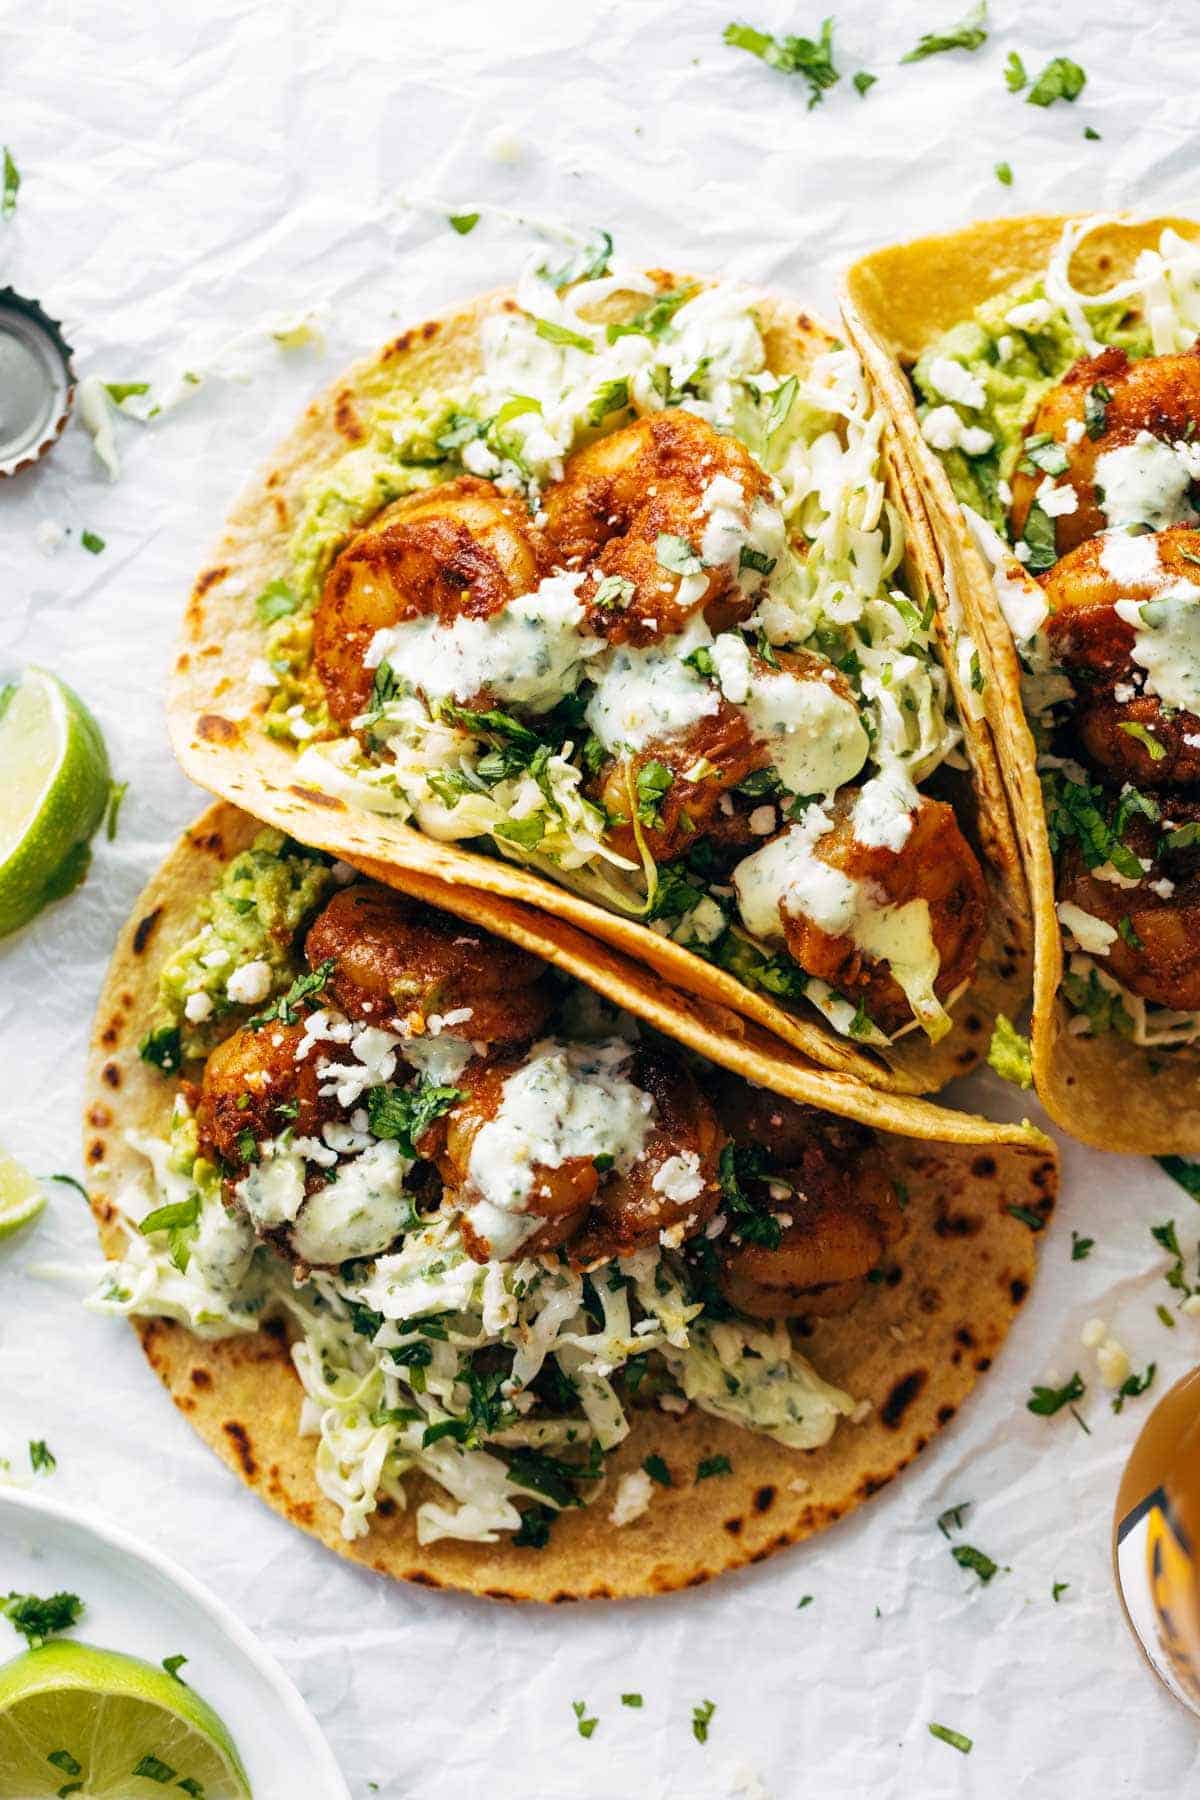 Spicy shrimp tacos with slaw.